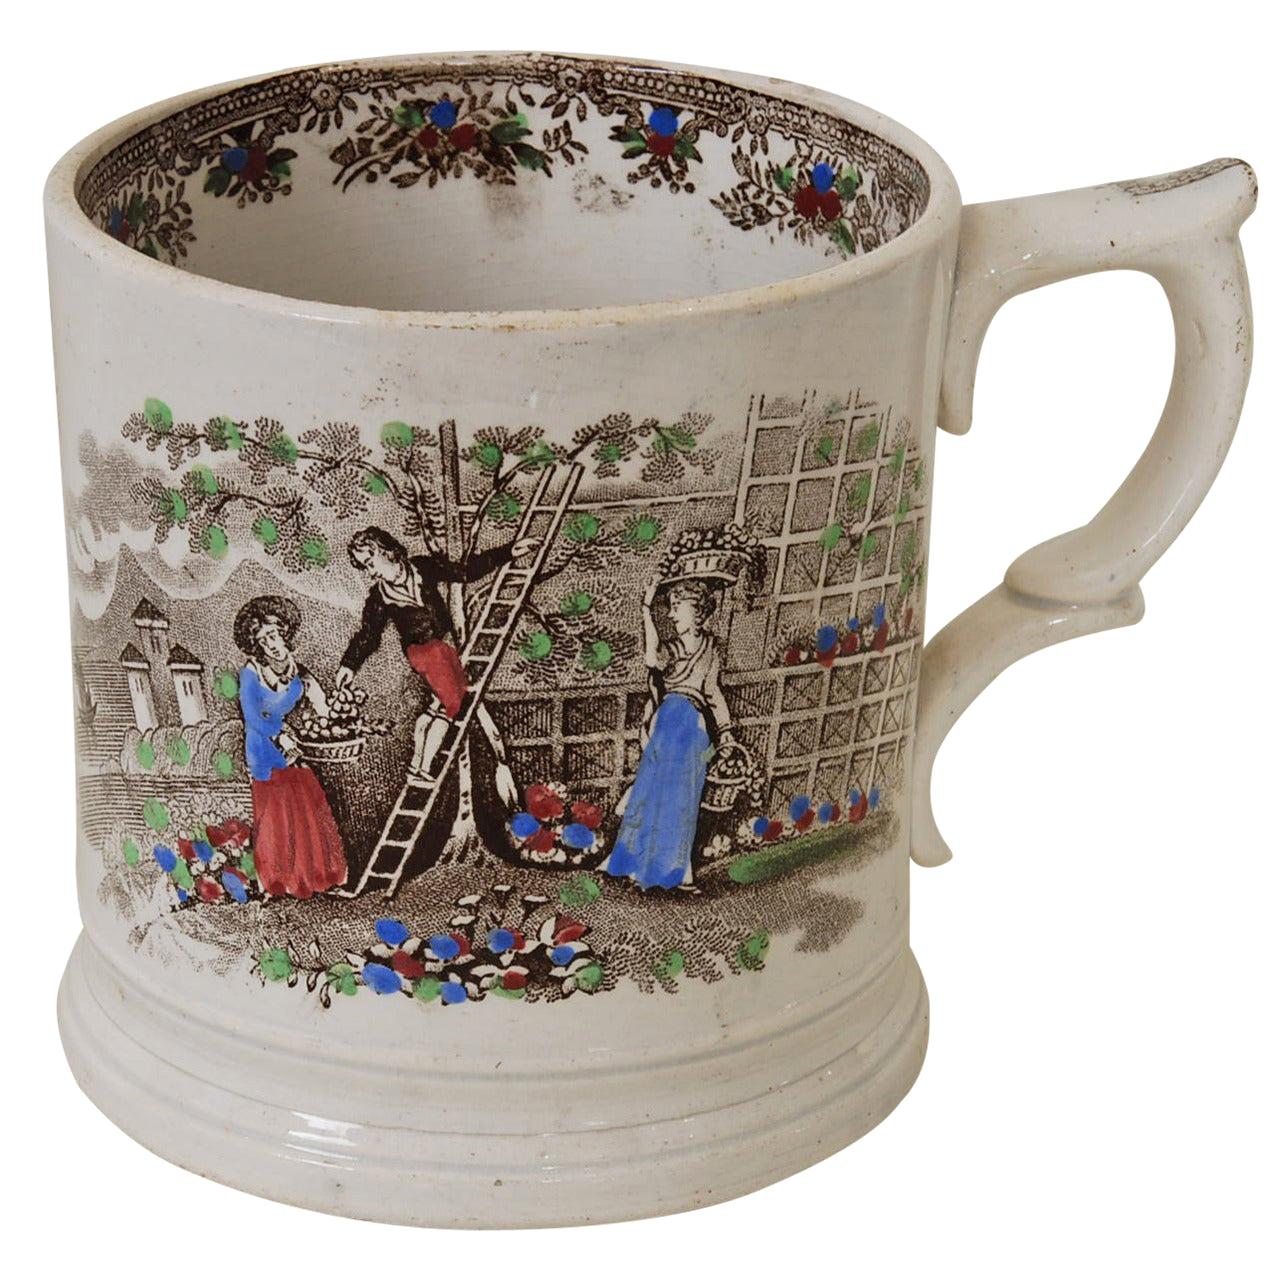 English Staffordshire Frog Mug with Hand Colored Garden Scenes, 19th Century For Sale